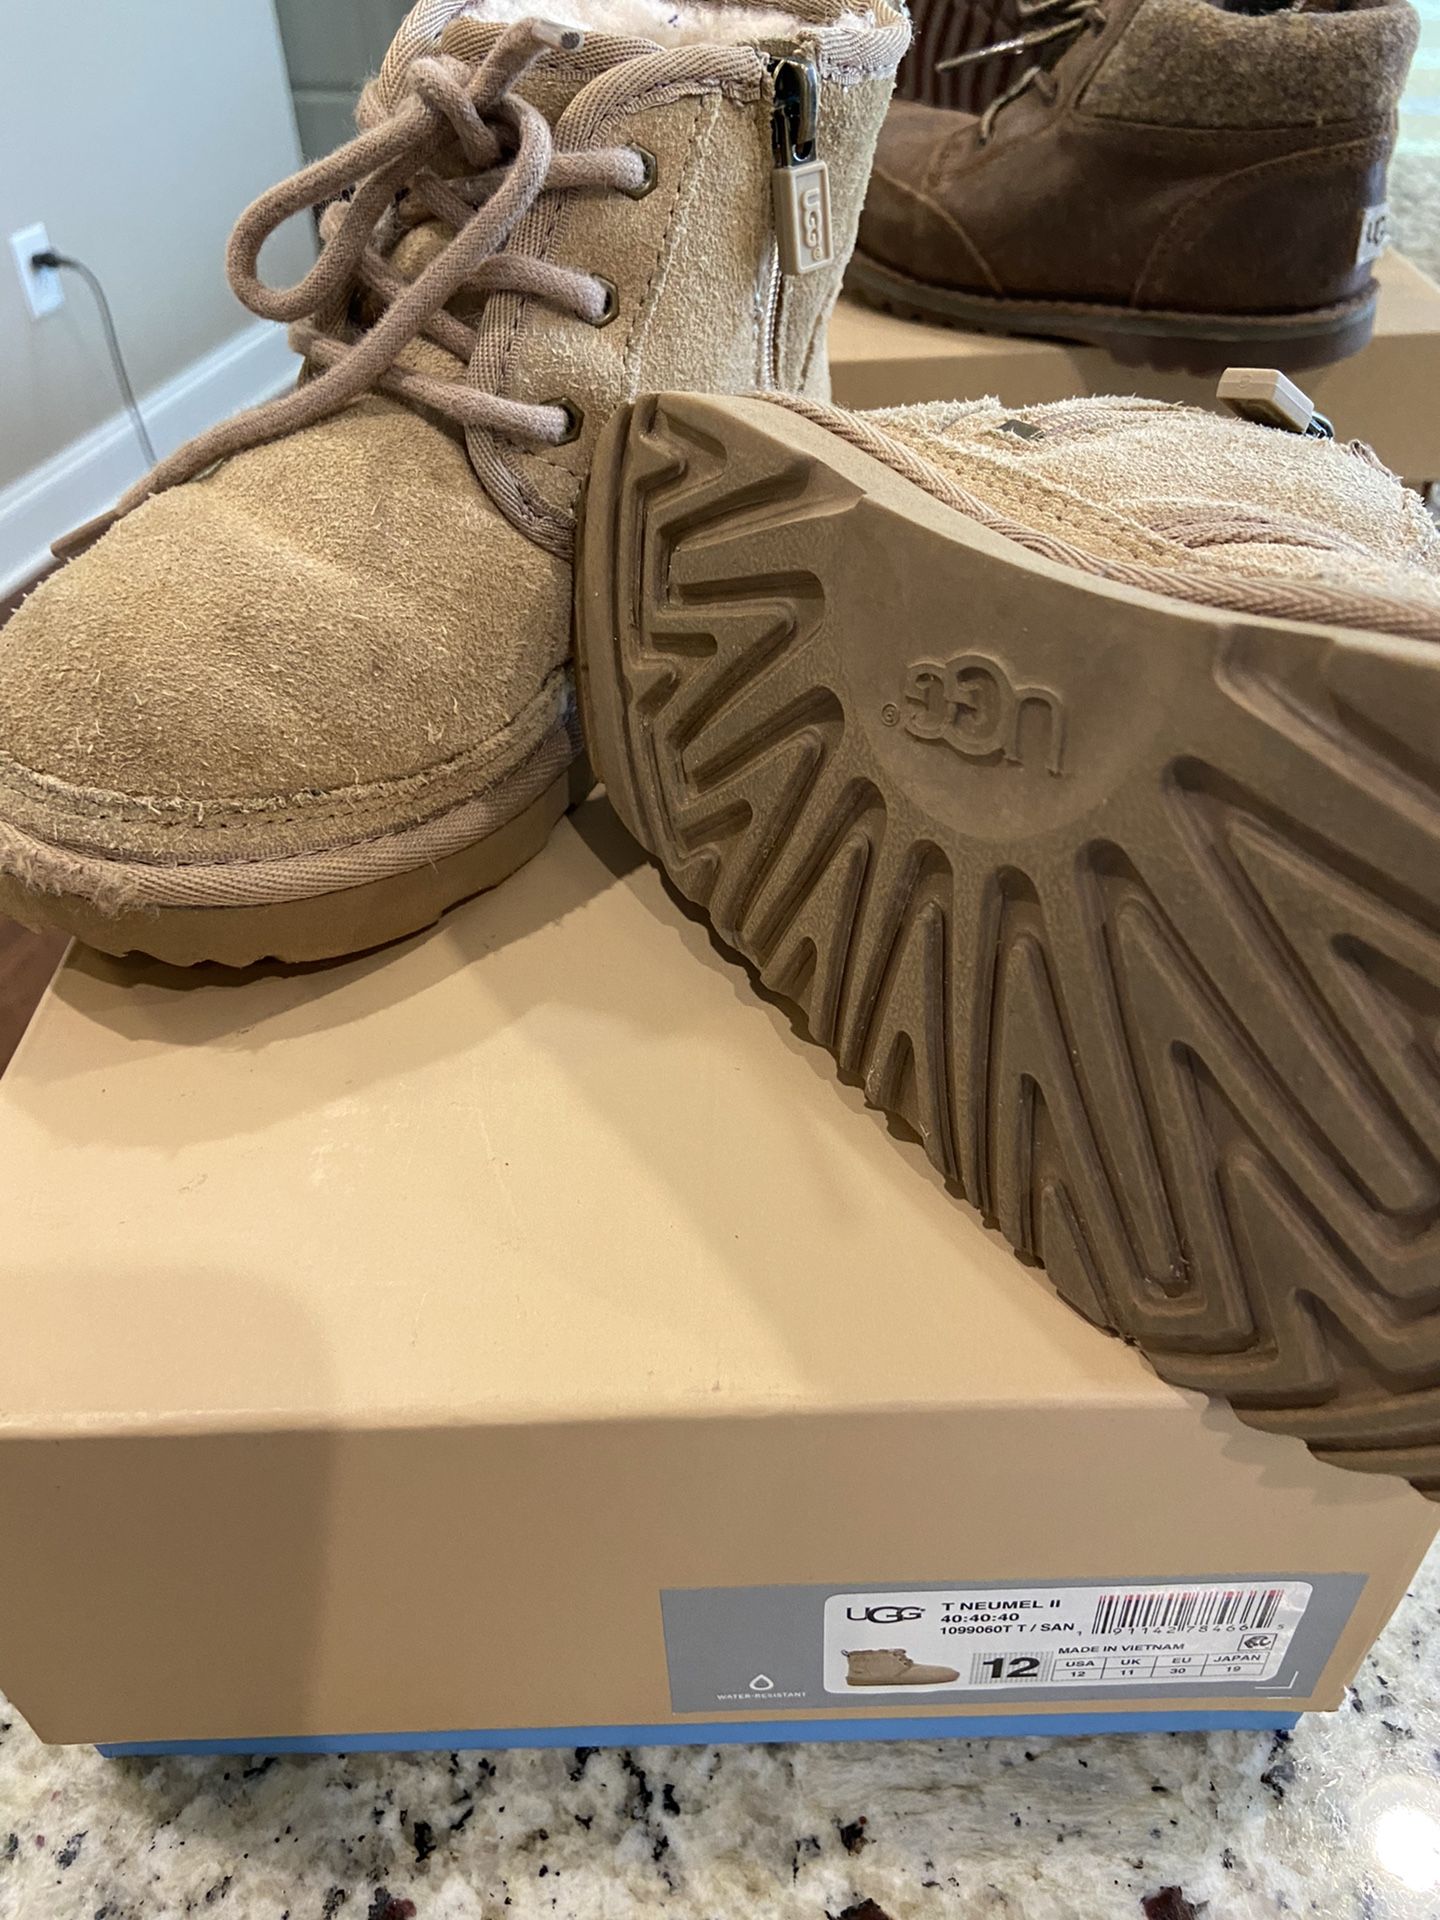 Ugg boots for kids